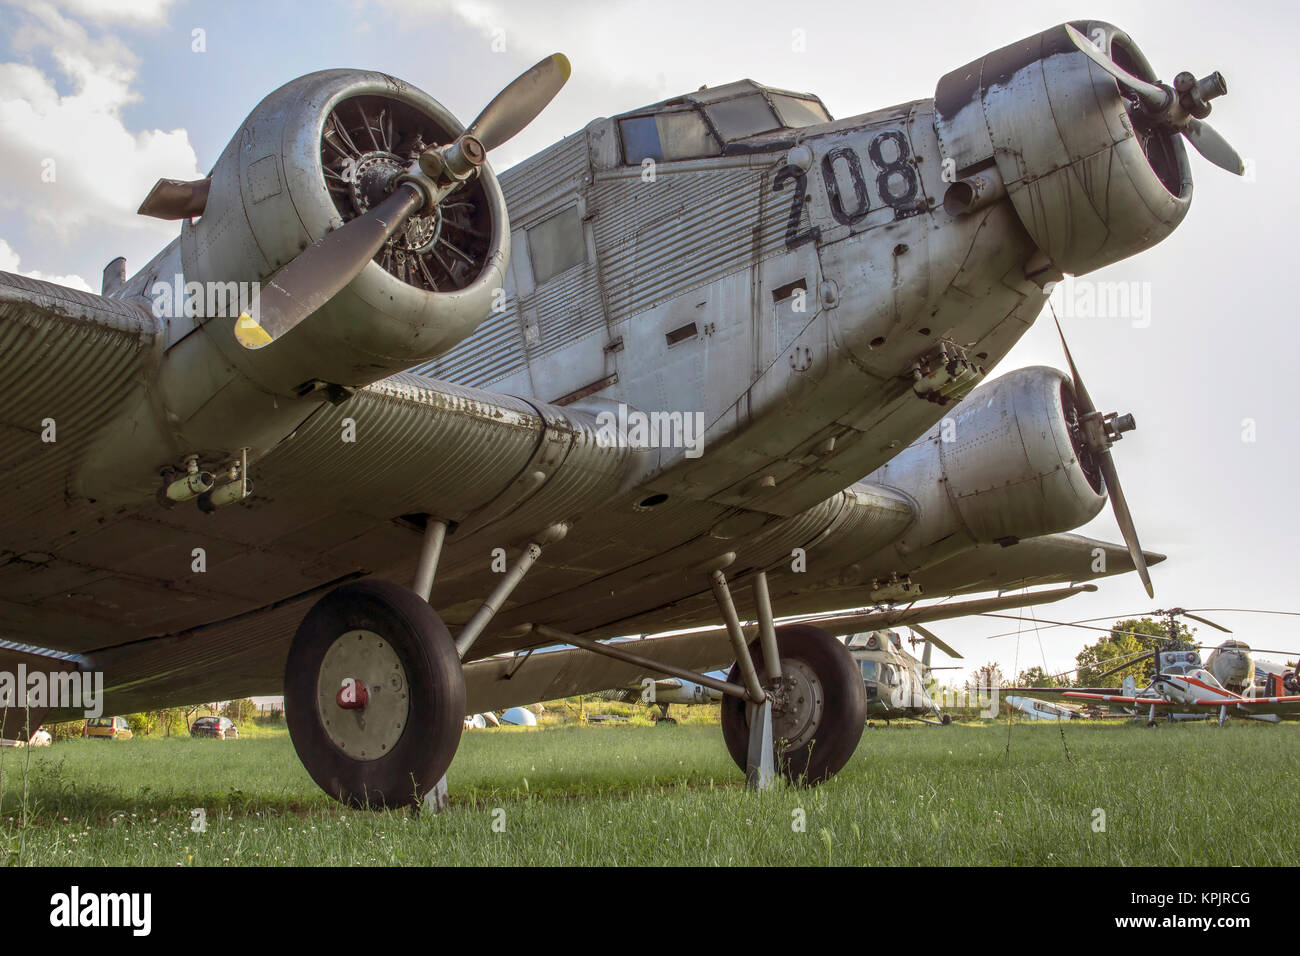 BELGRADE, SERBIA -  Junkers Ju 52 German tri-motor transport aircraft, manufactured from 1931 to 1952, presented on the yard of the Belgrade Aviation Stock Photo